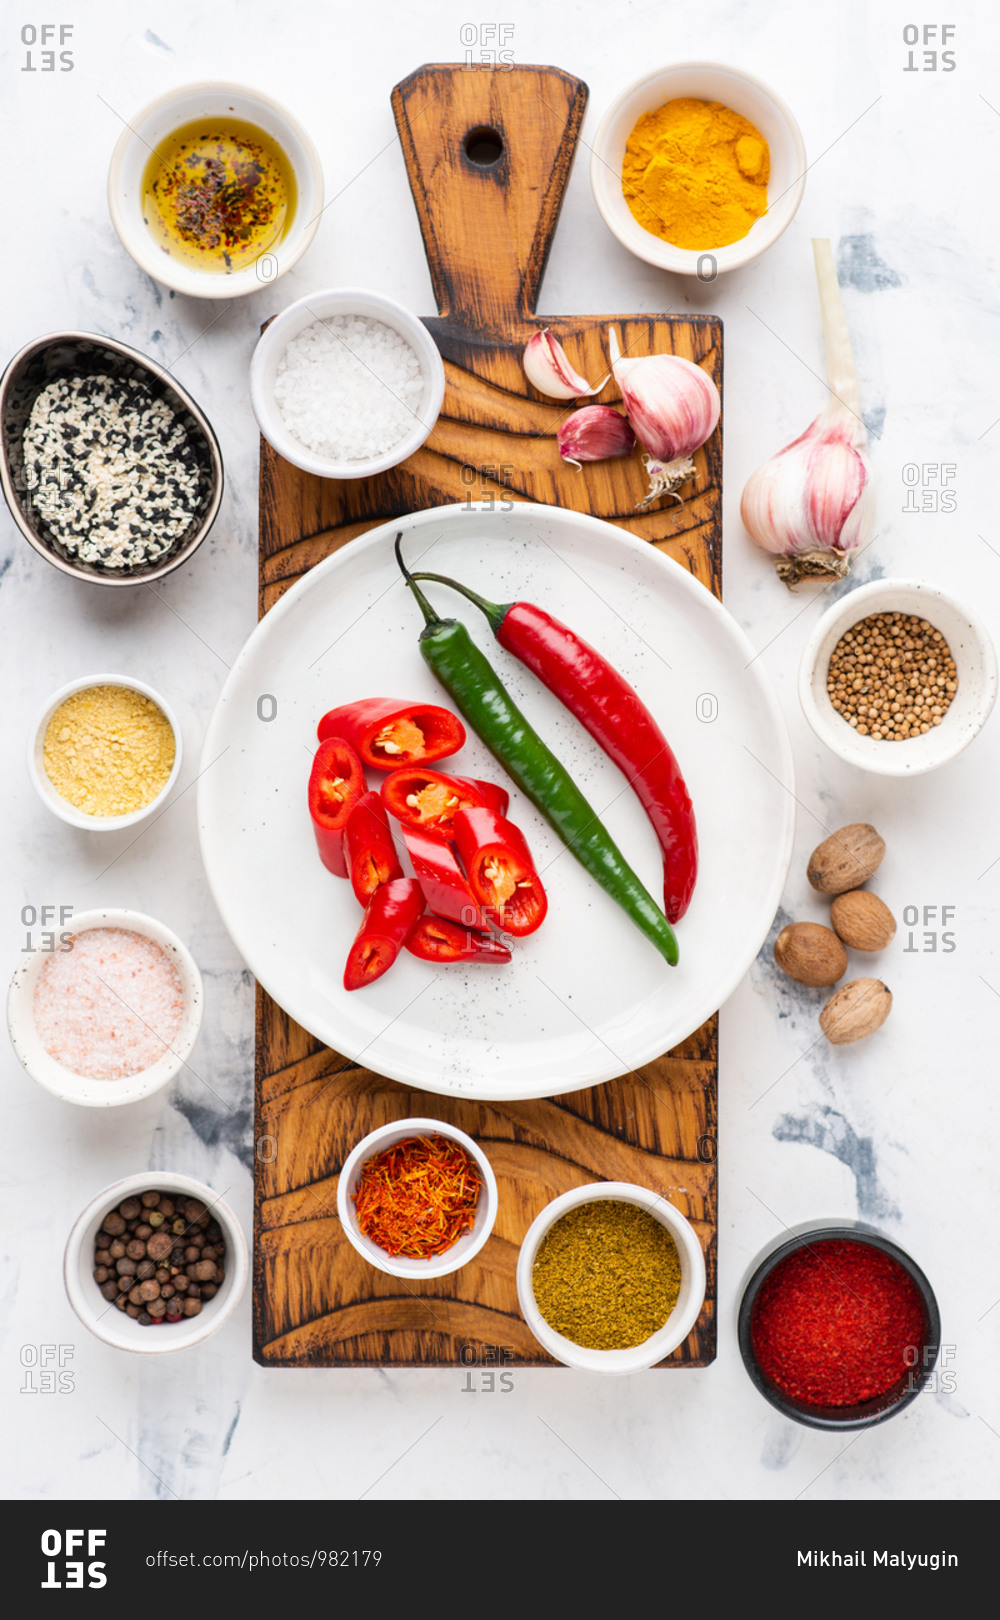 Red and green chili peppers on wooden cutting board with various spices over white background